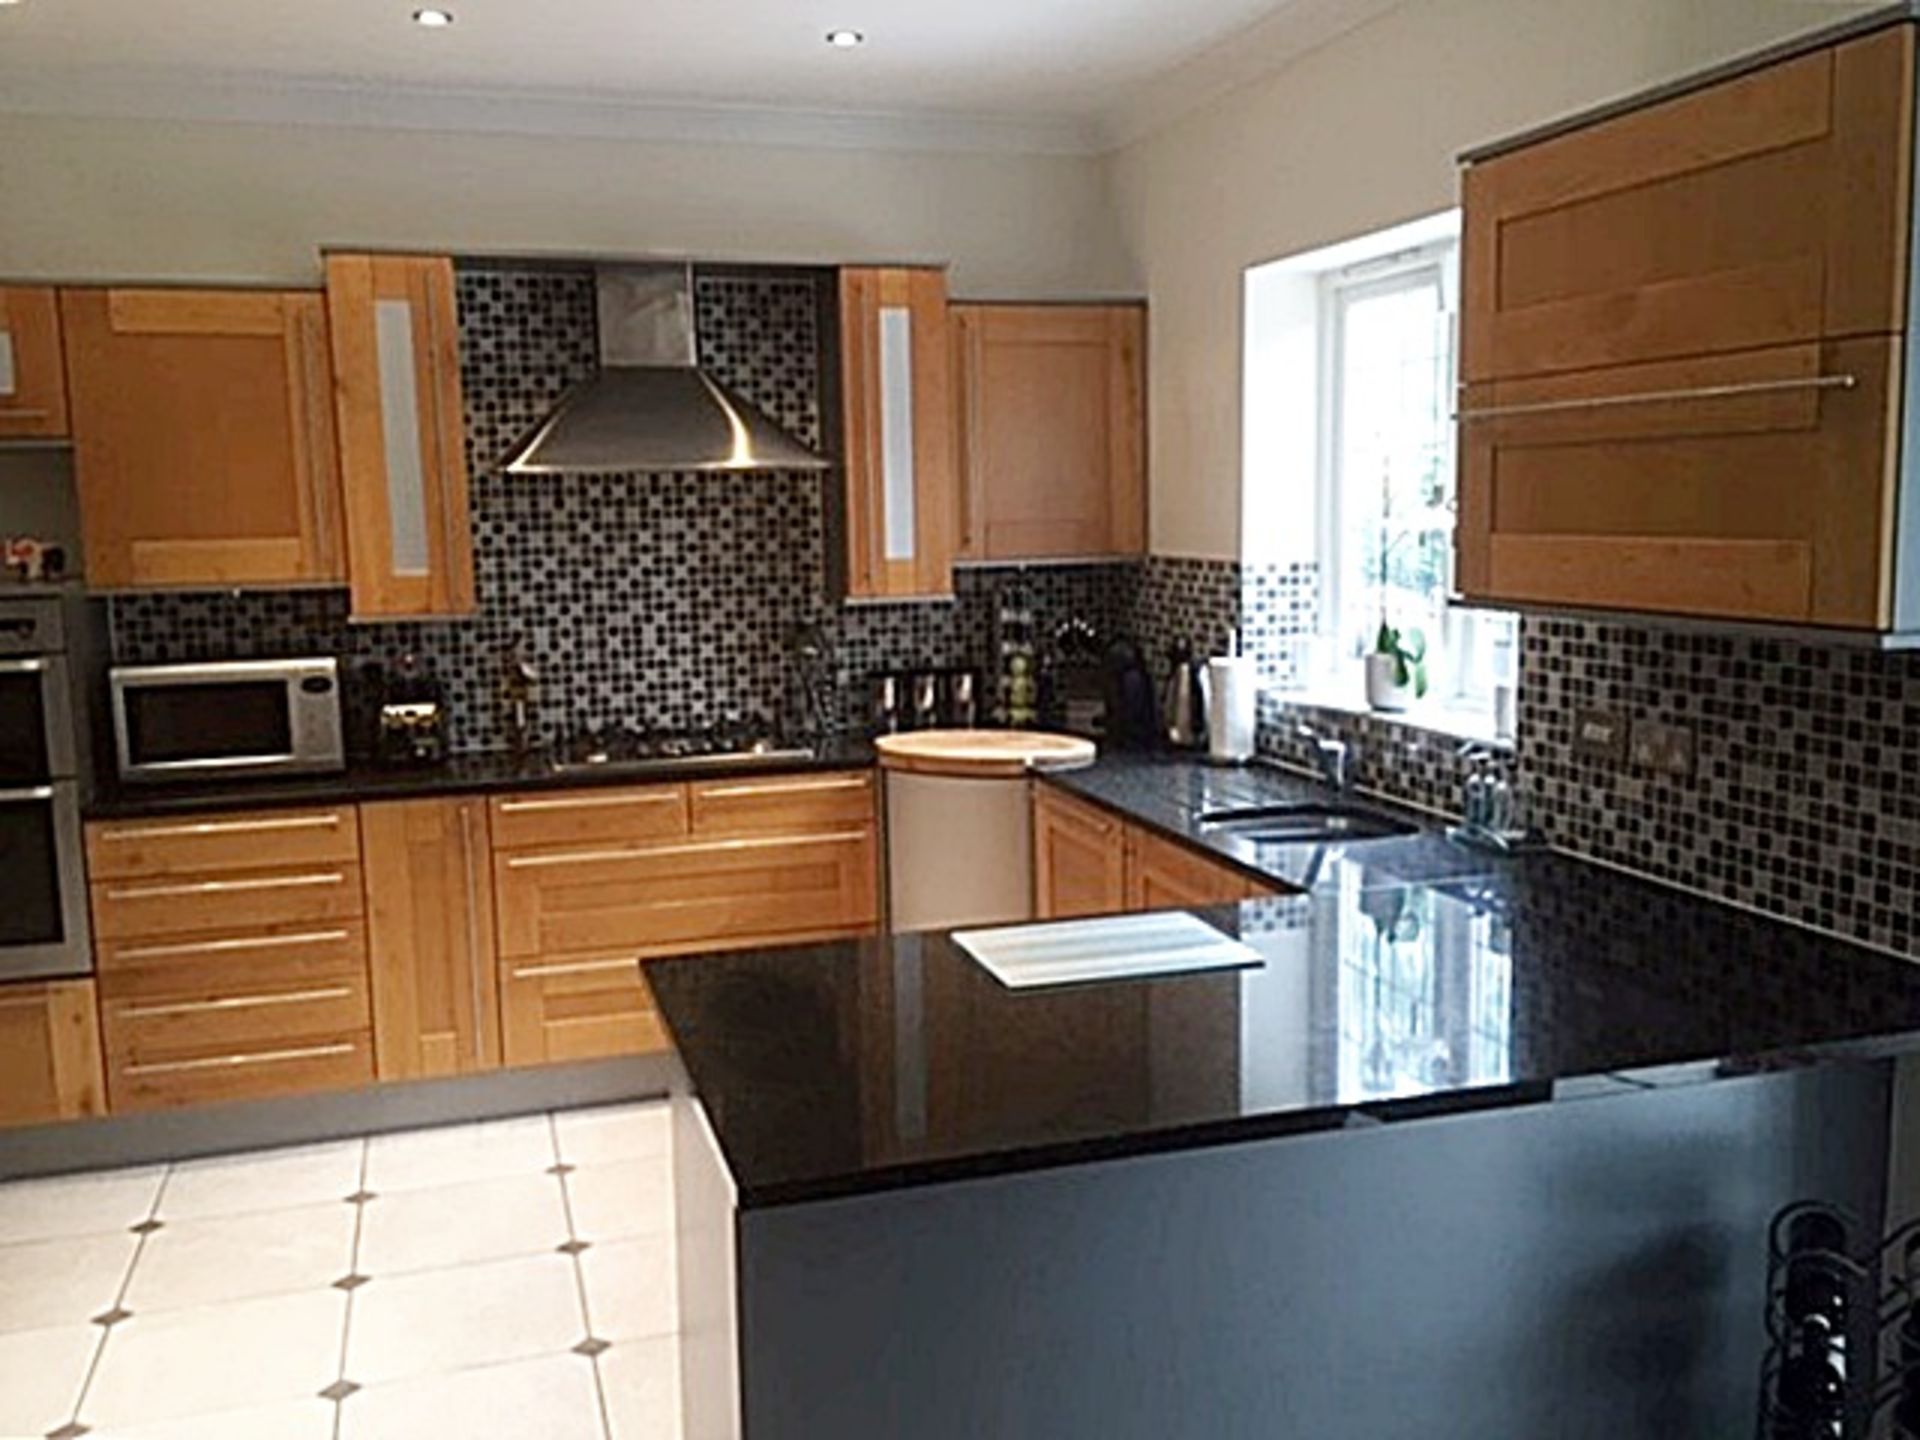 1 x Solid Wood Fitted Kitchen By Panorama - Features Luxurious Black Granite Worktops, Integrated